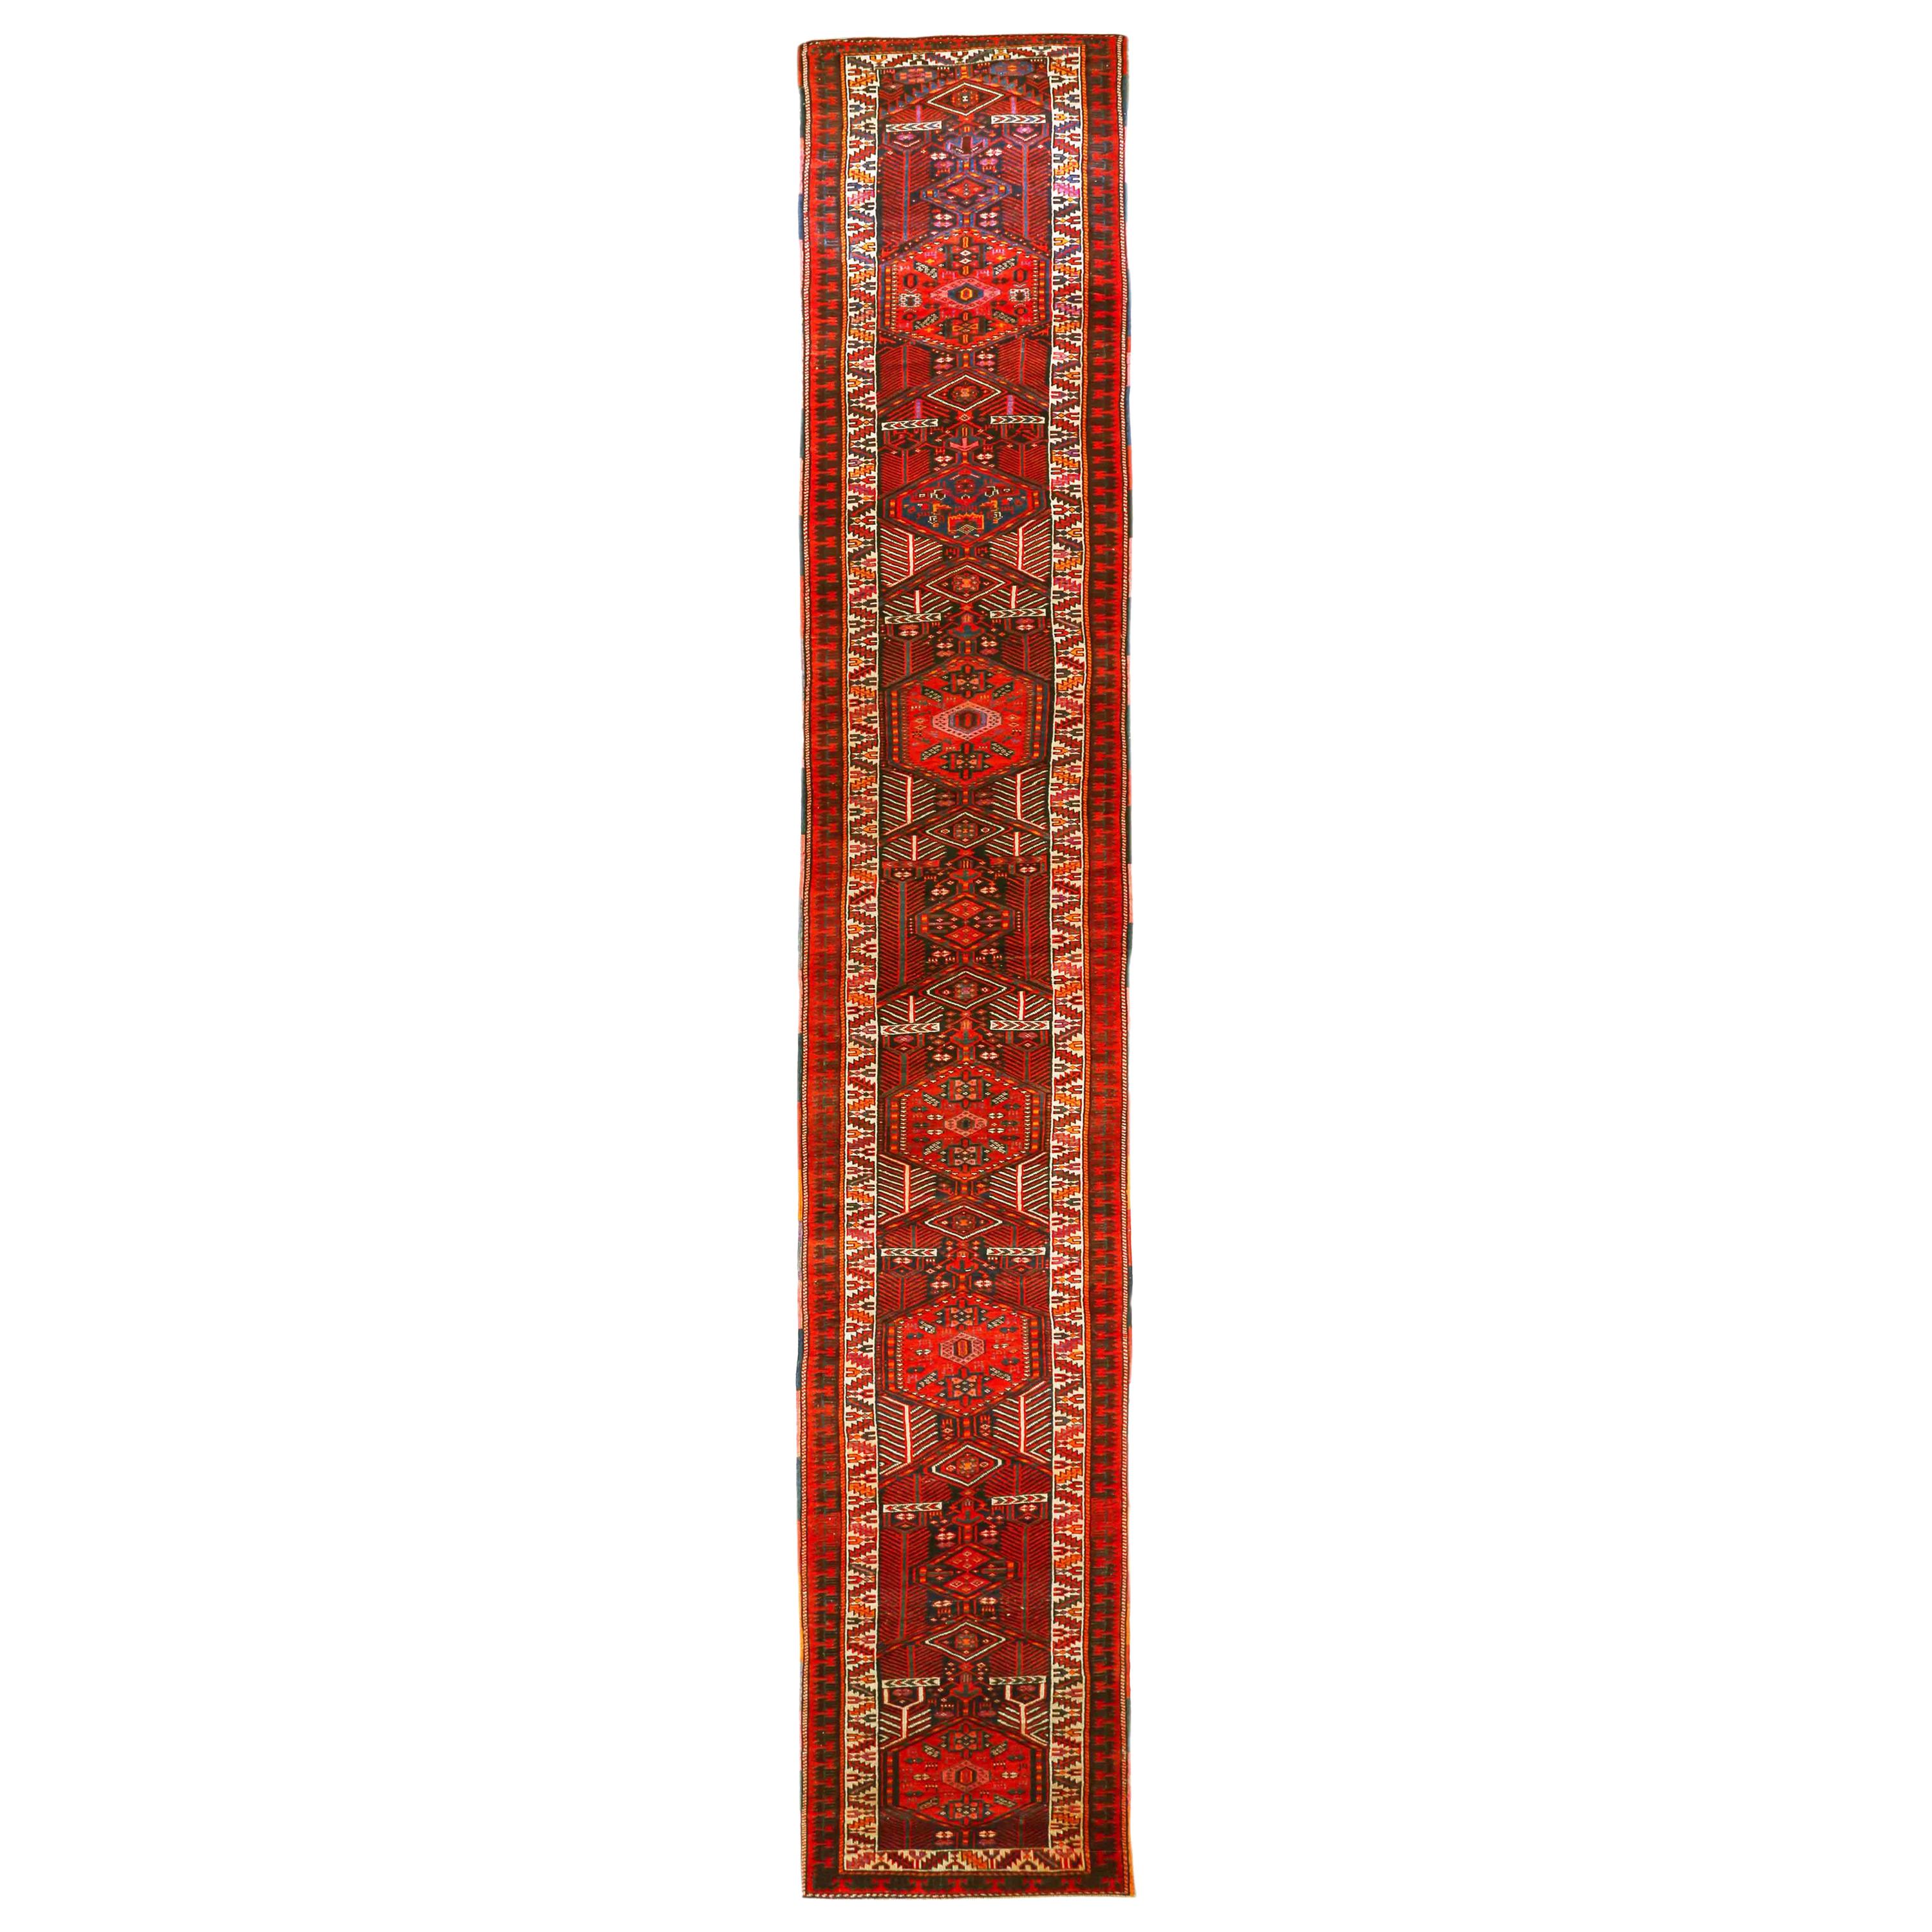 1900s Antique Persian Rug in Azerbaijan Design with Extended Length For Sale